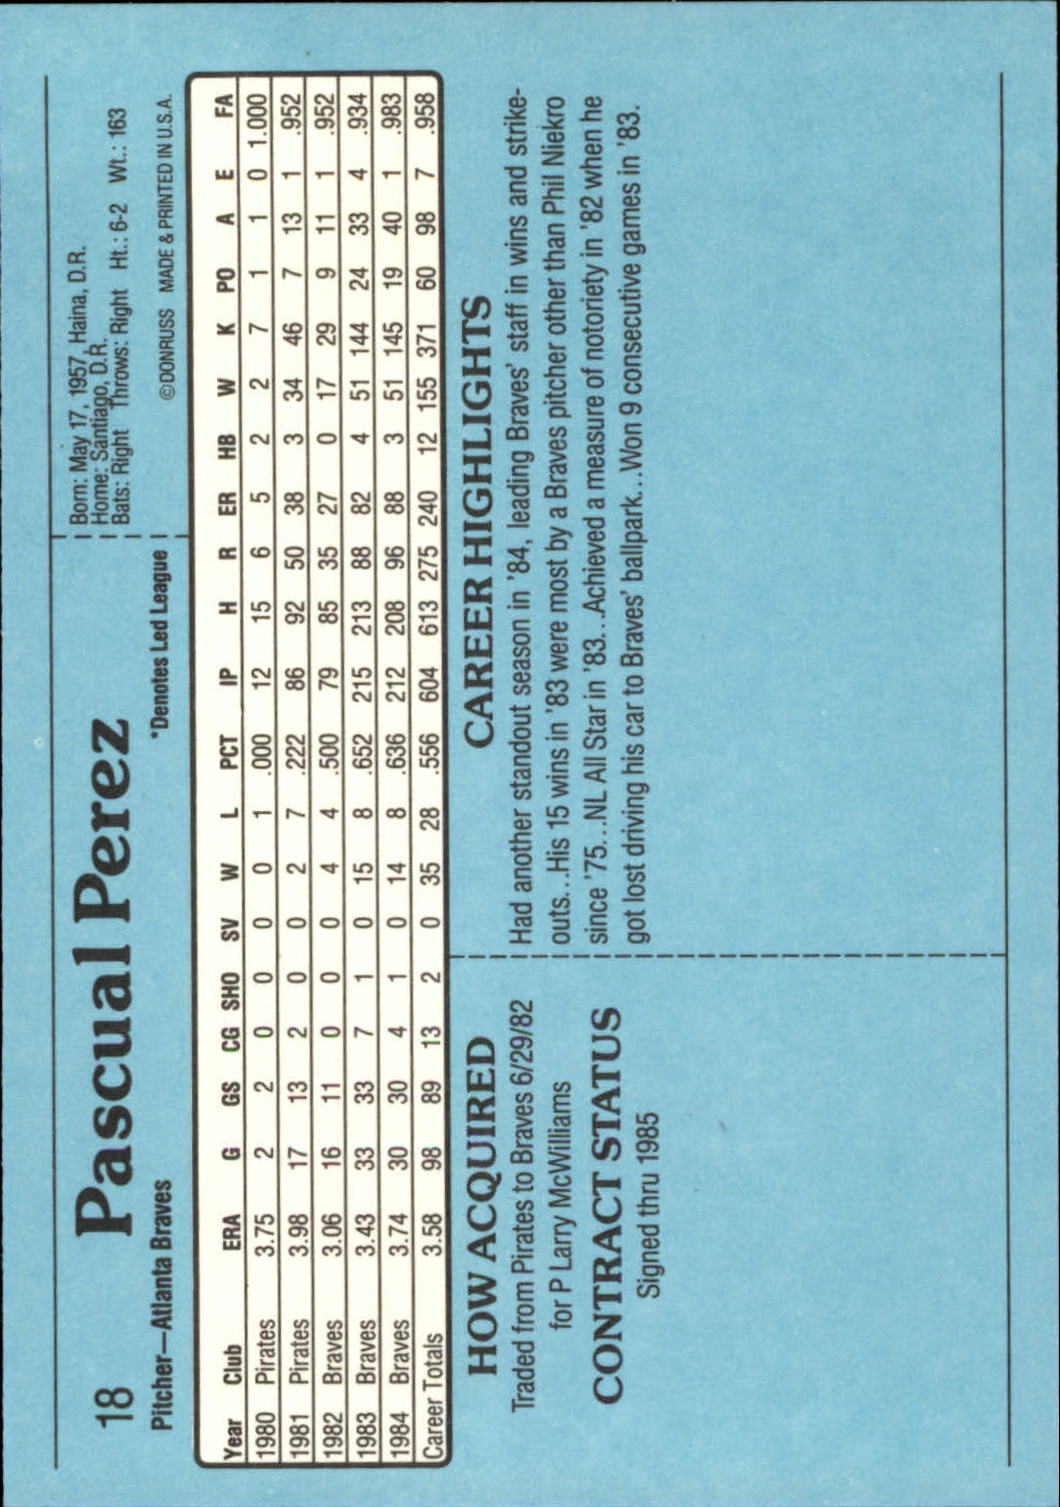 1985 Donruss Action All-Stars #18 Pascual Perez back image